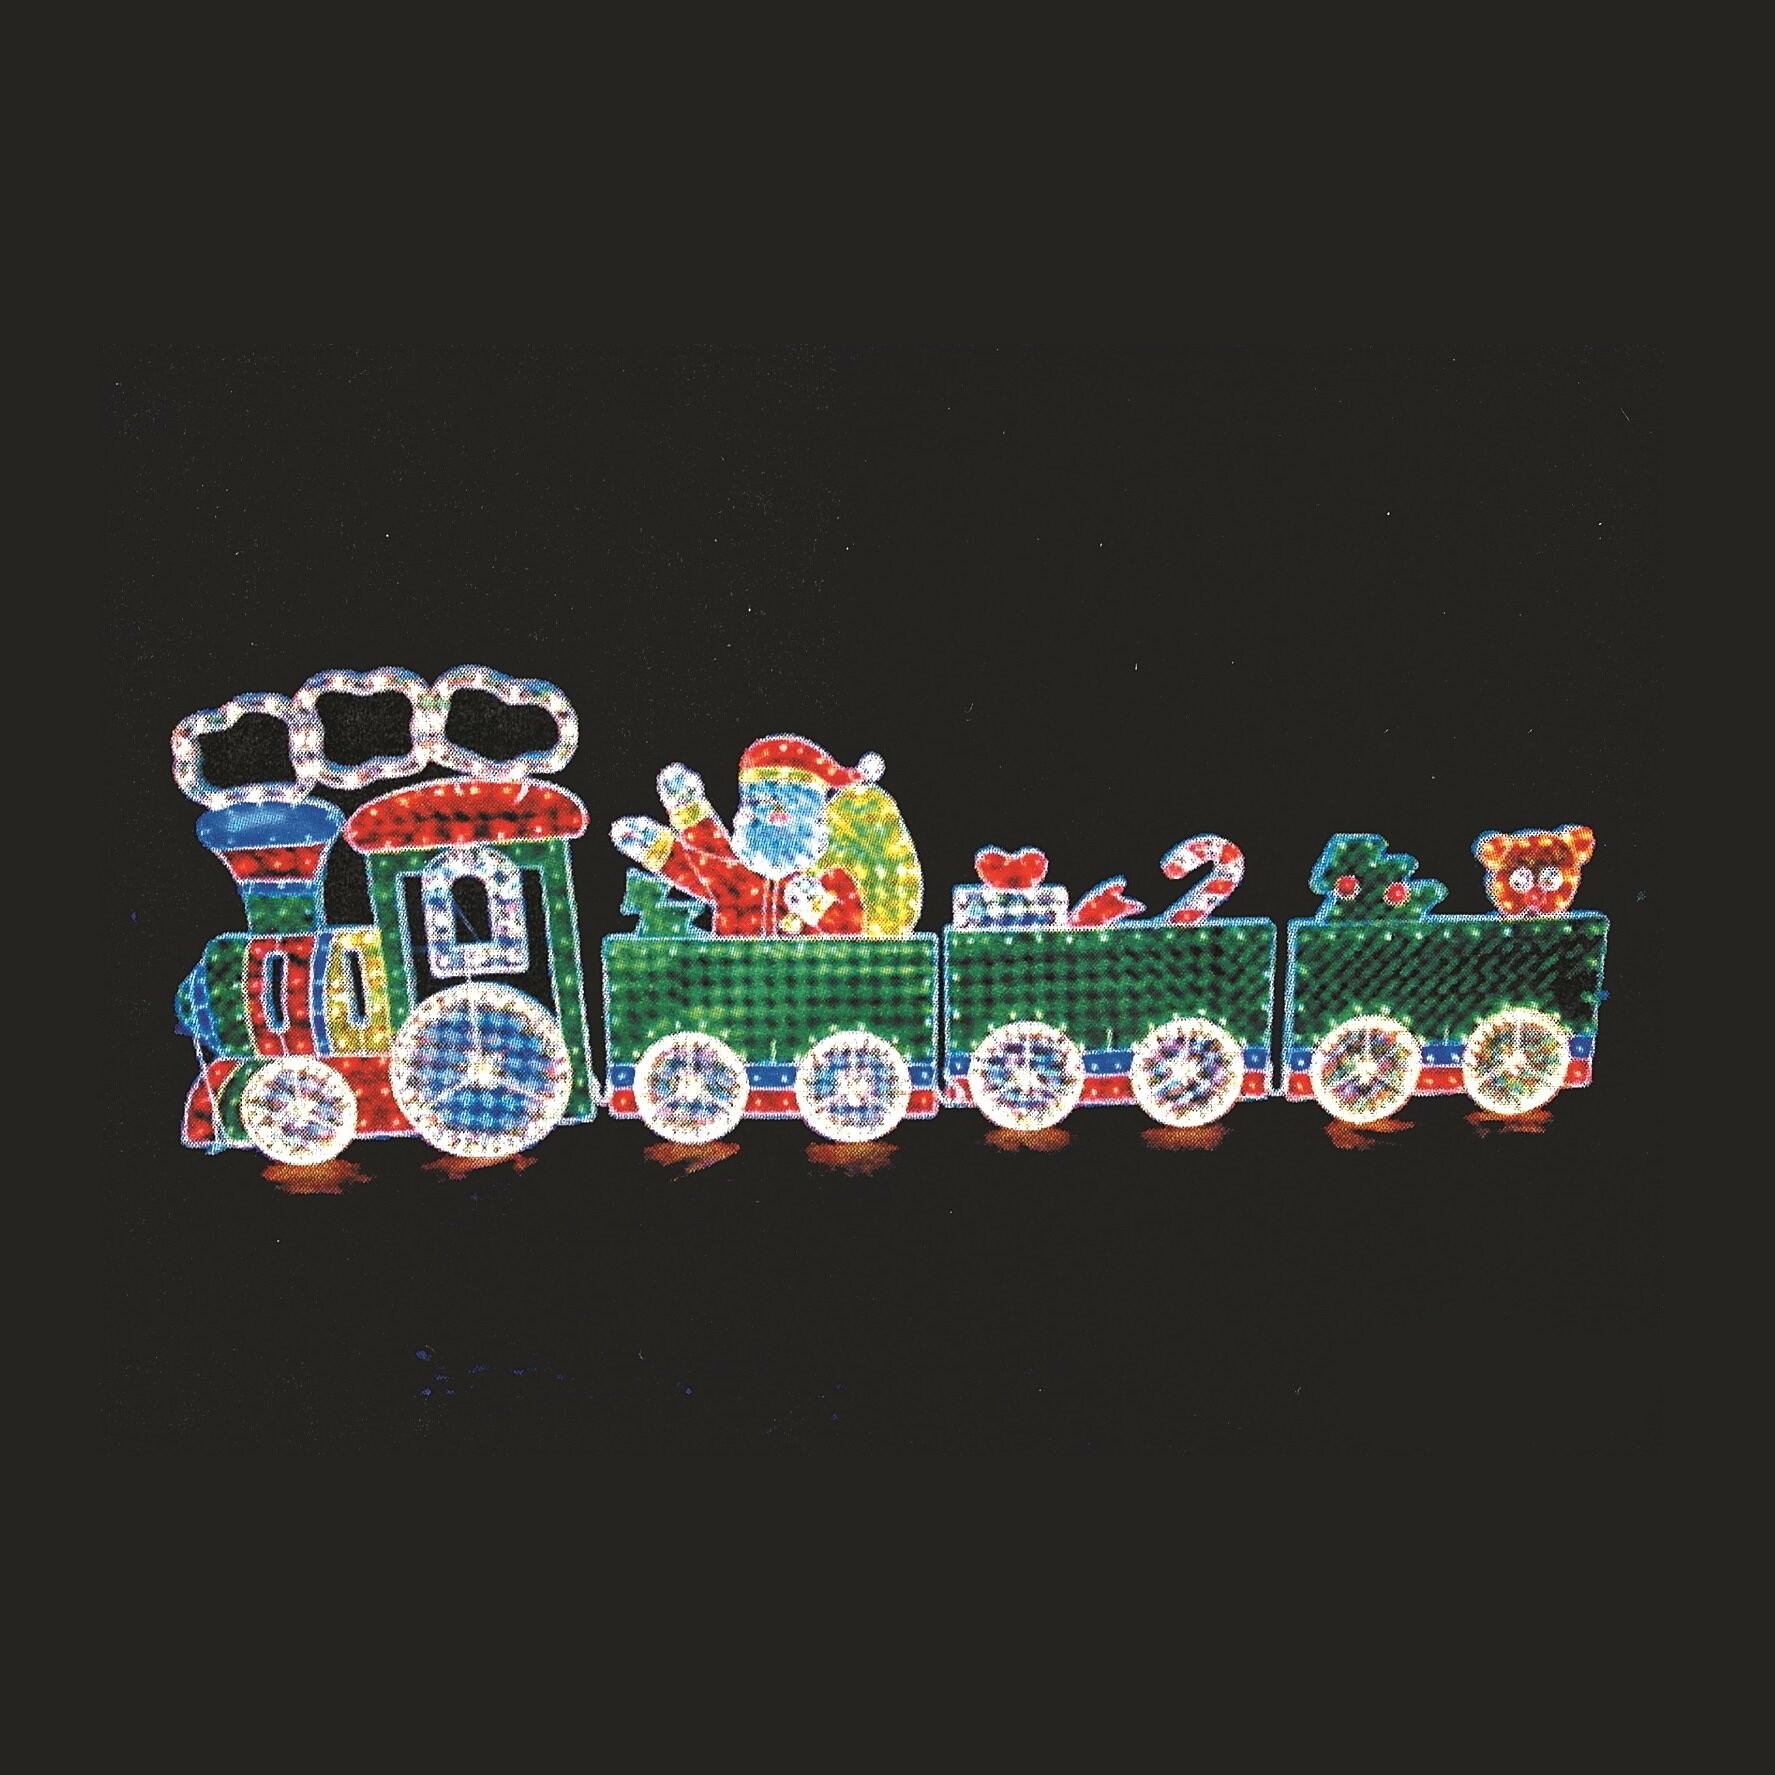 4 Car Holograph Train Christmas Decoration with Motion